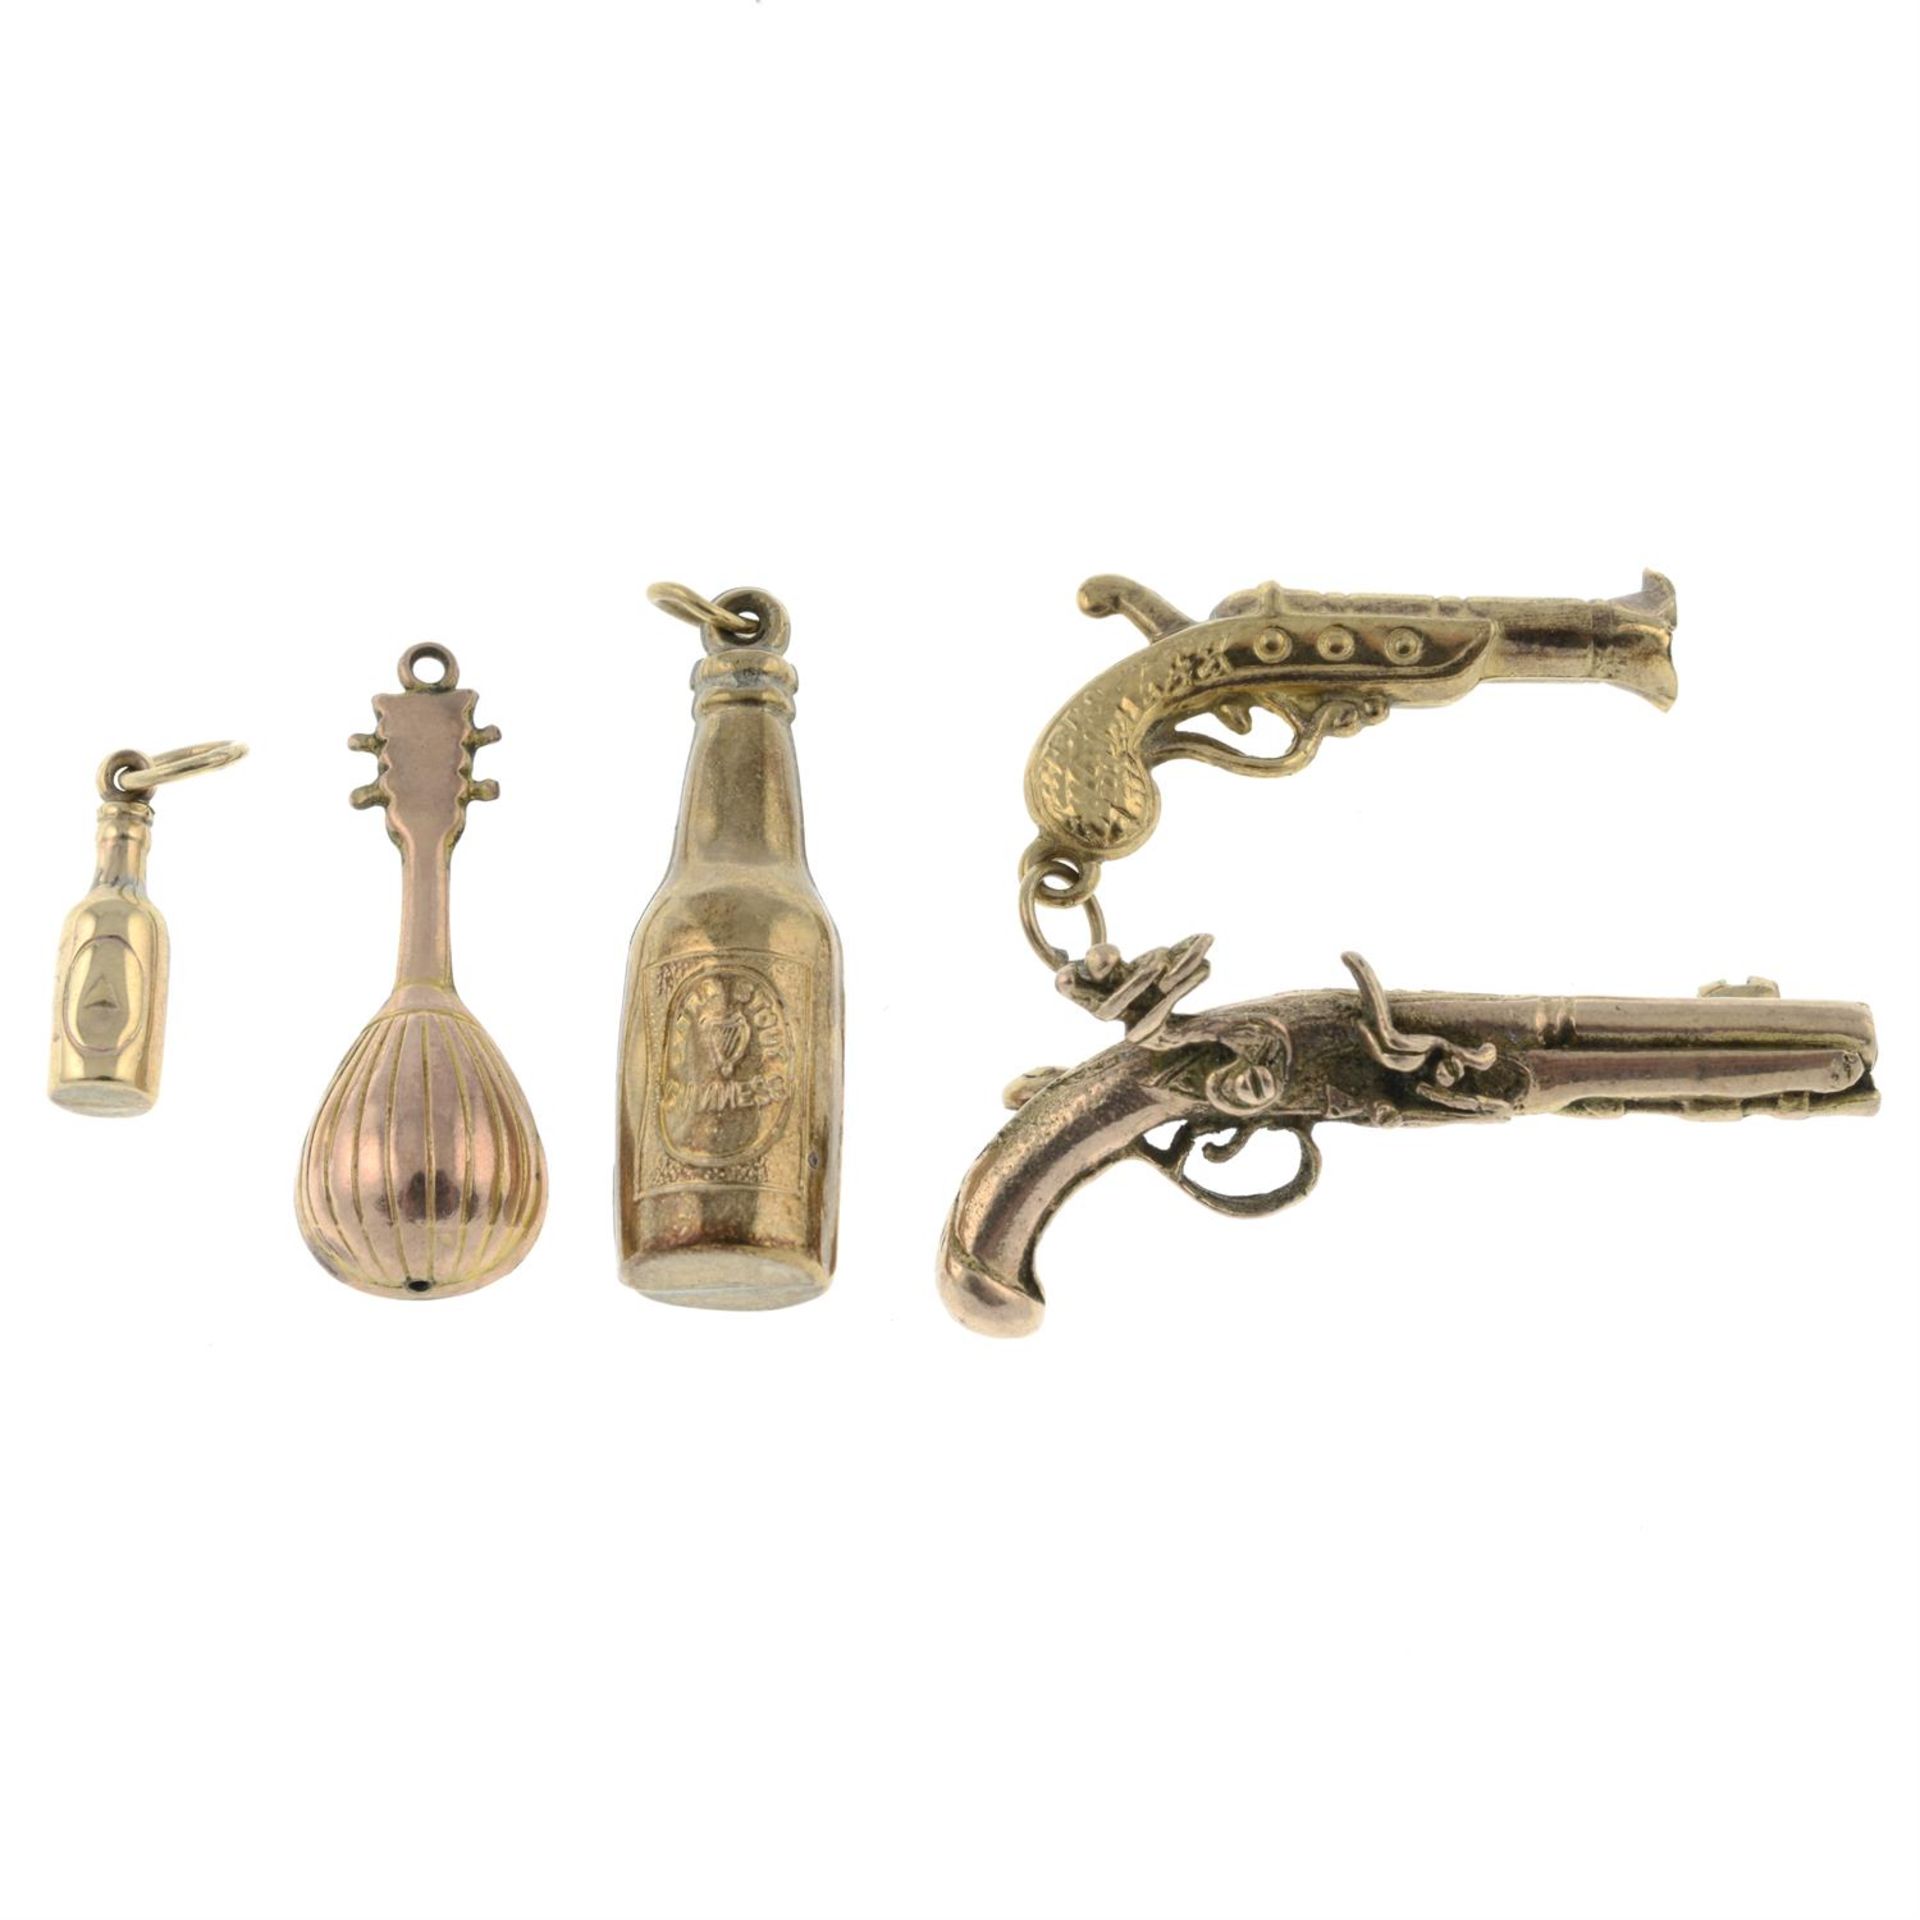 Three 9ct gold charms, together with a further charm and a 9ct gold pistol brooch. - Image 2 of 2